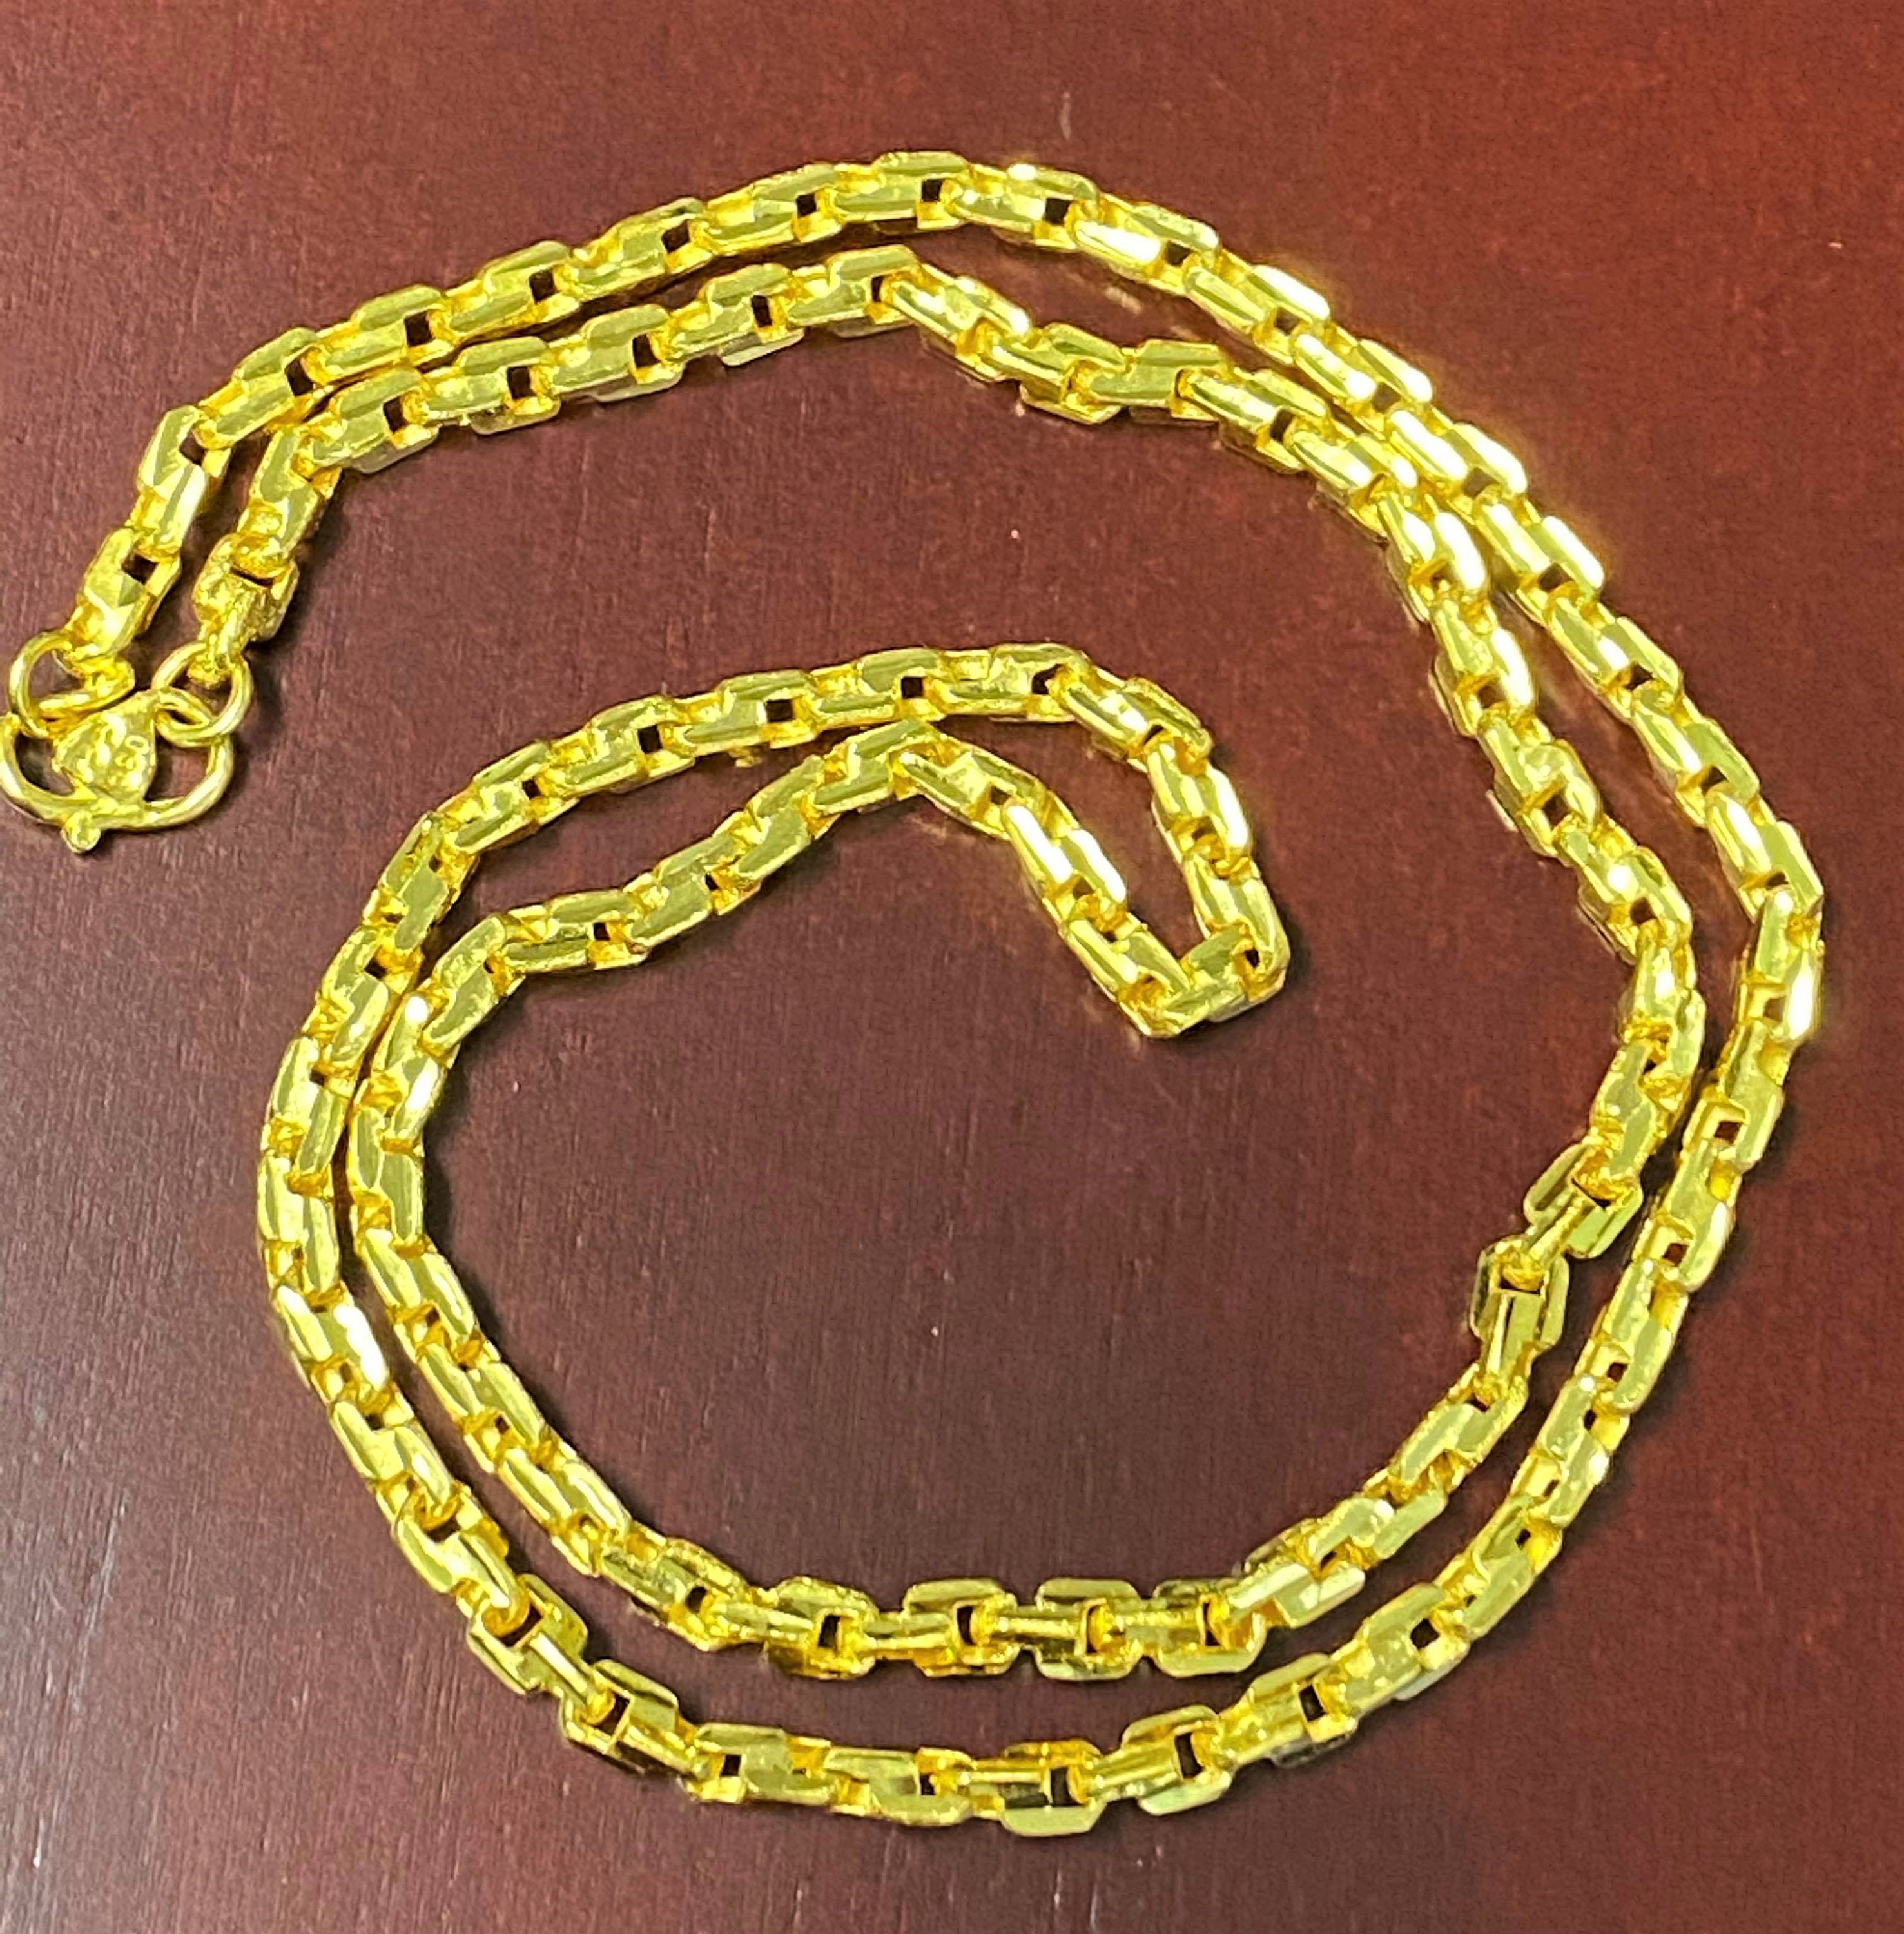 Vintage 24K 980 Solid Pure Gold Anchor Chain Link Necklace 20'', 21'', 22'' 24